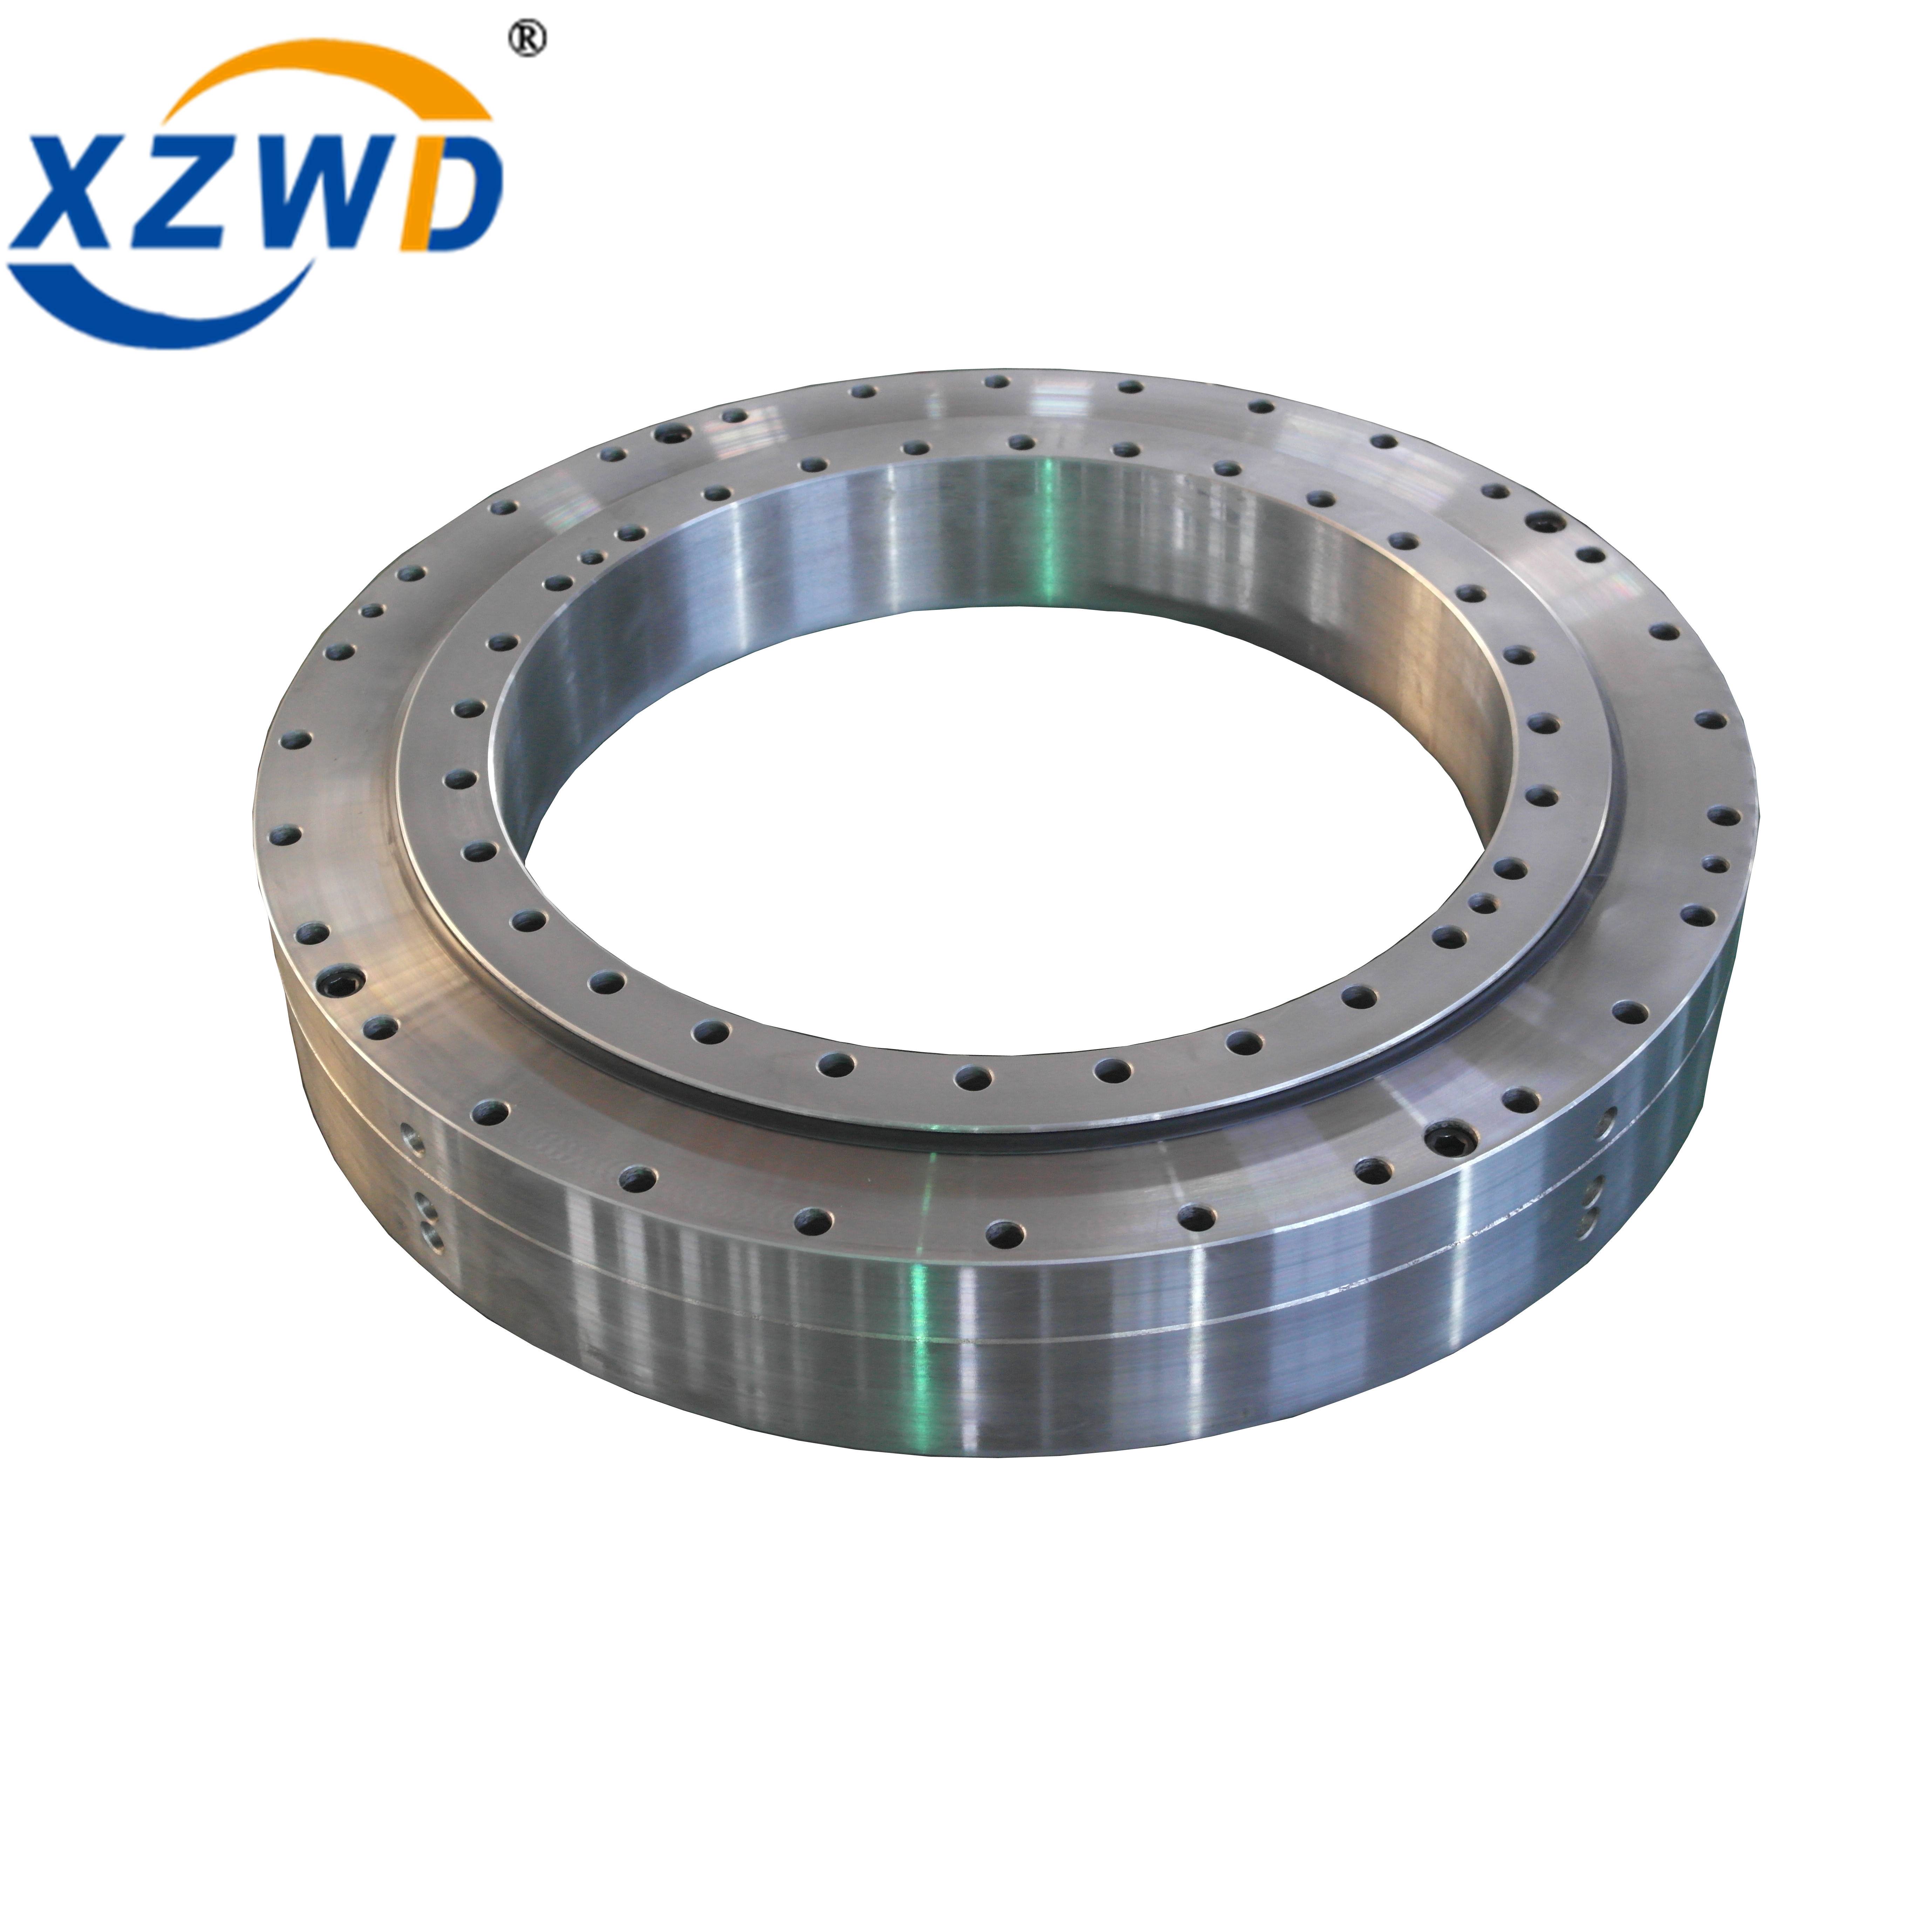 Discount wholesale Swing Bearing - Non-Geared Three row Roller Slewing Bearing for Heavy Machinery – Wanda